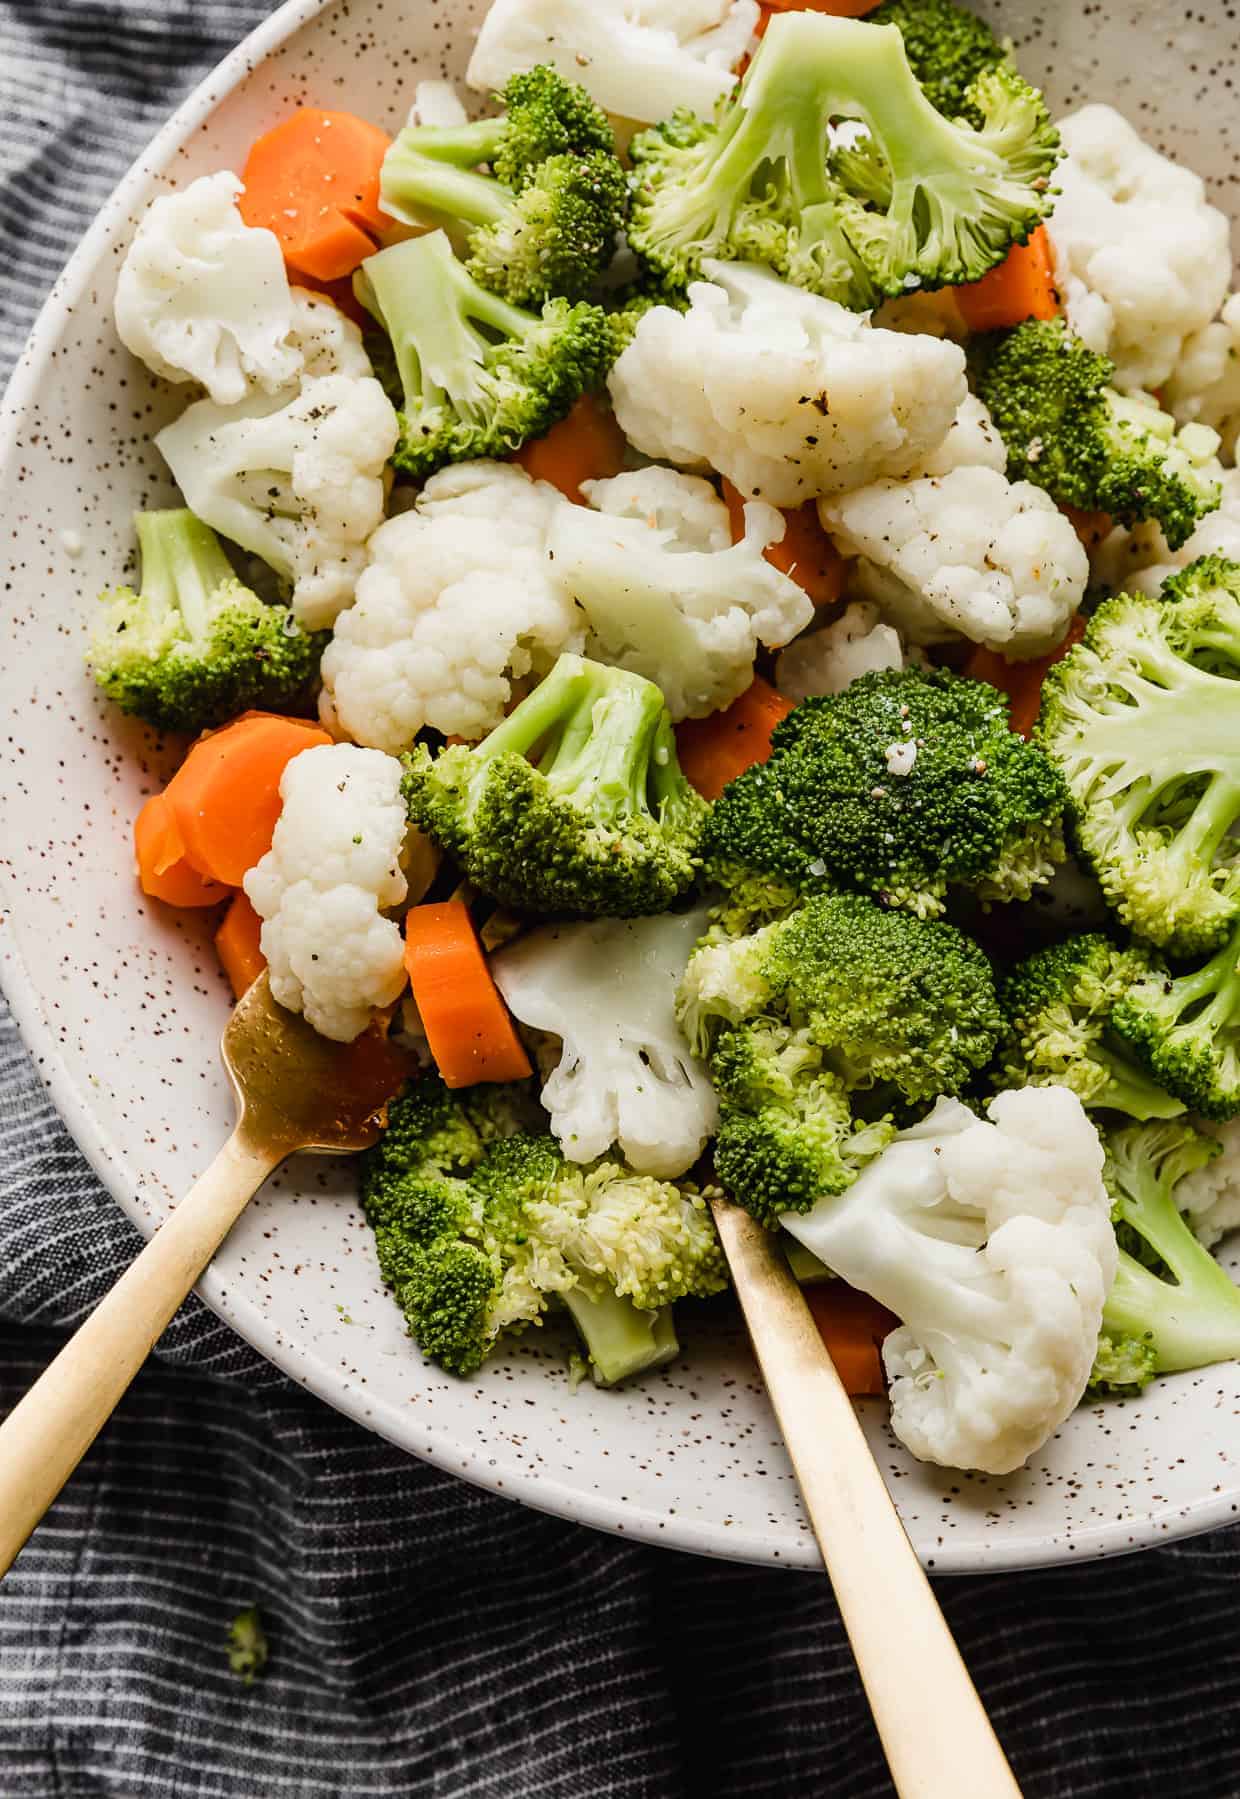 Close up photo of Buttered Vegetables, broccoli, cauliflower florets, and carrots.